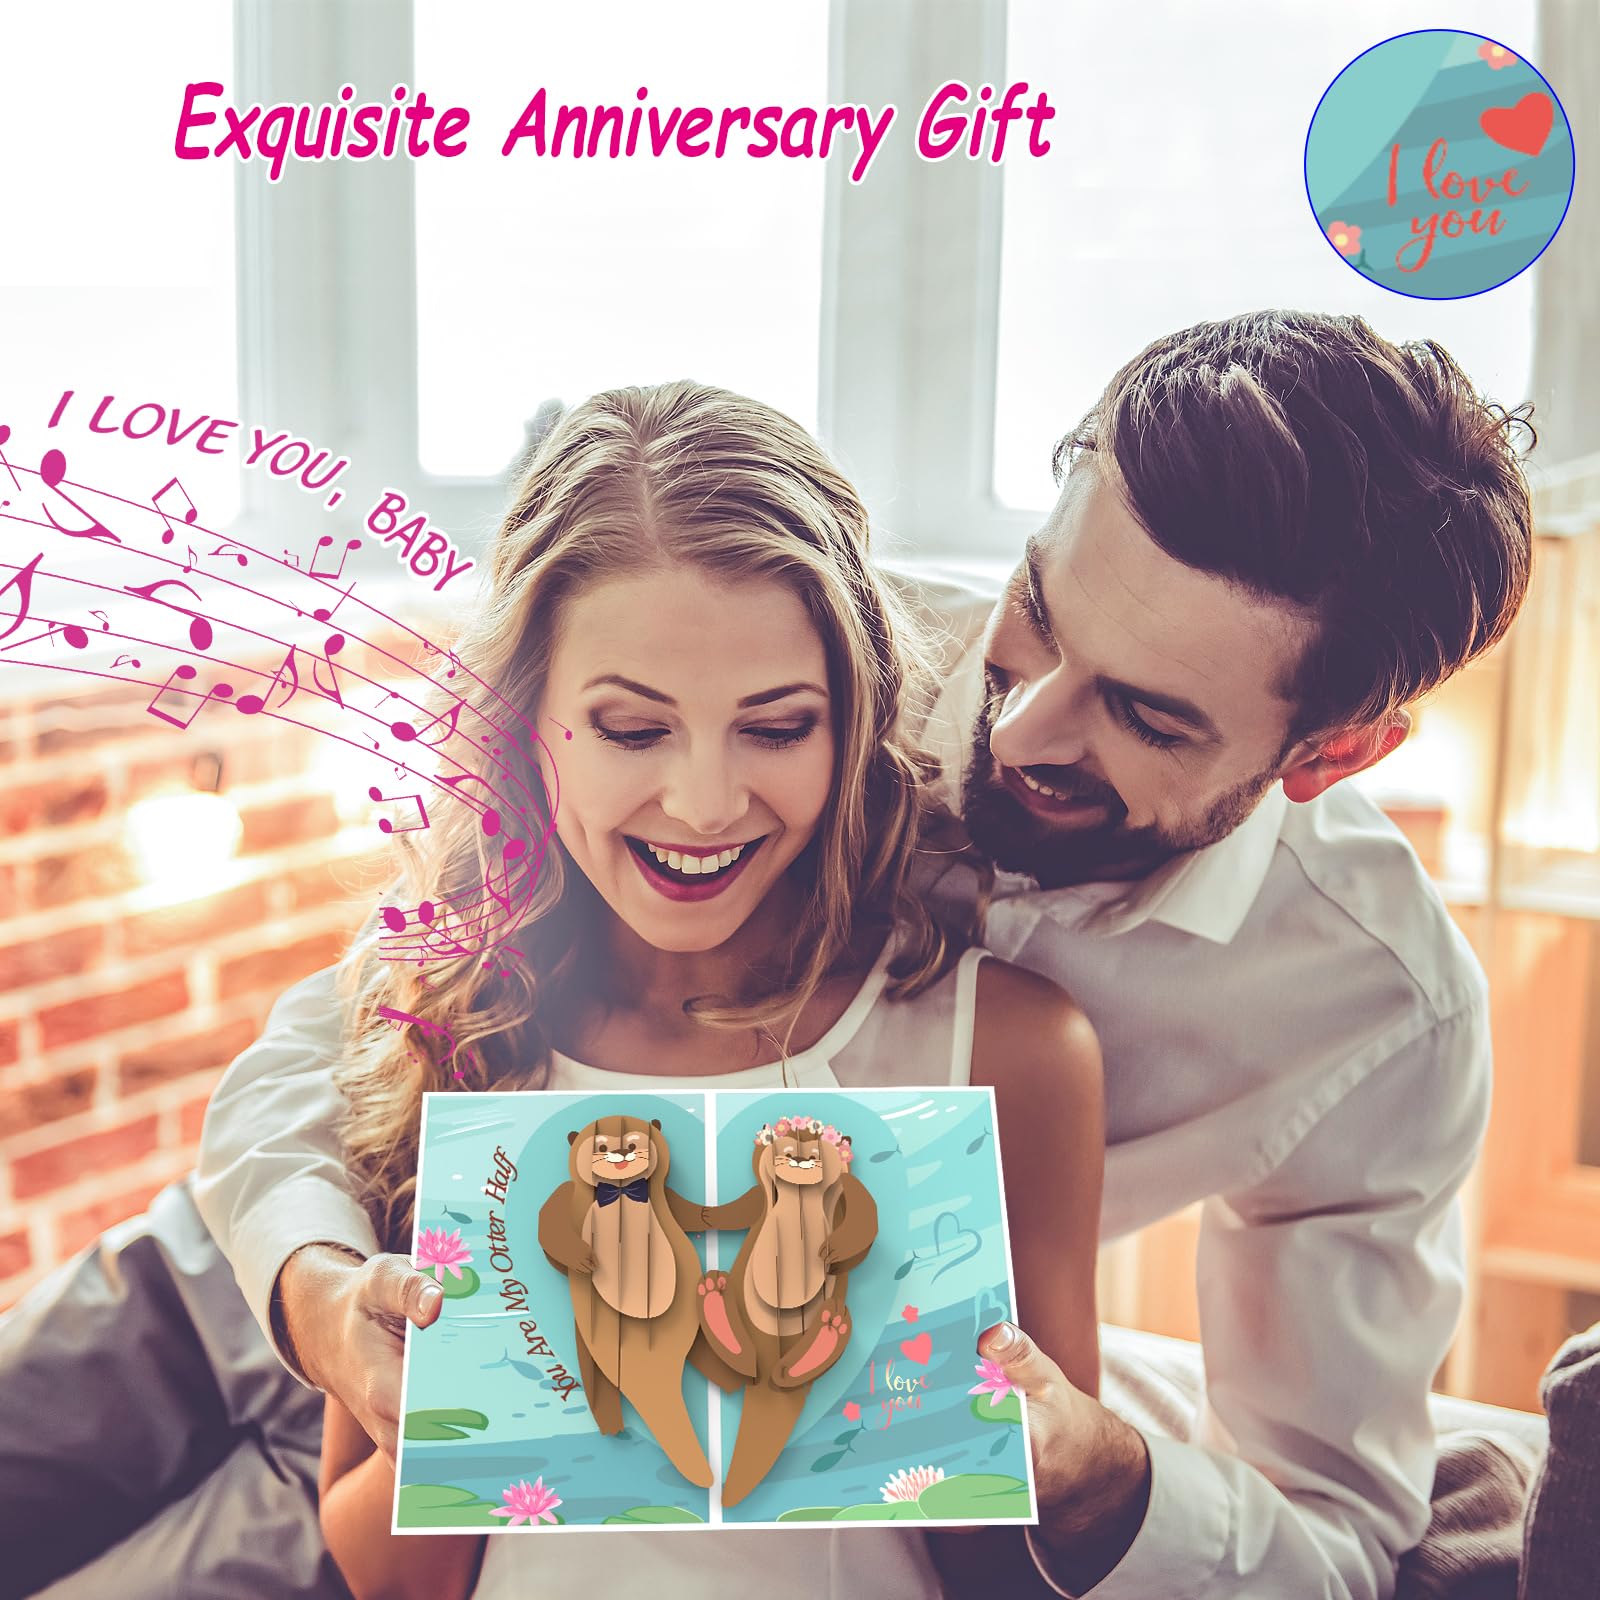 Anniversary Card, Wedding Anniversary Card with Music, Anniversary Cards for 1st/10th/20th/30th/40th/50th/60th Anniversary,for Wife   Husband   Couple   Her   Him, Anni Gifts.(Otter)